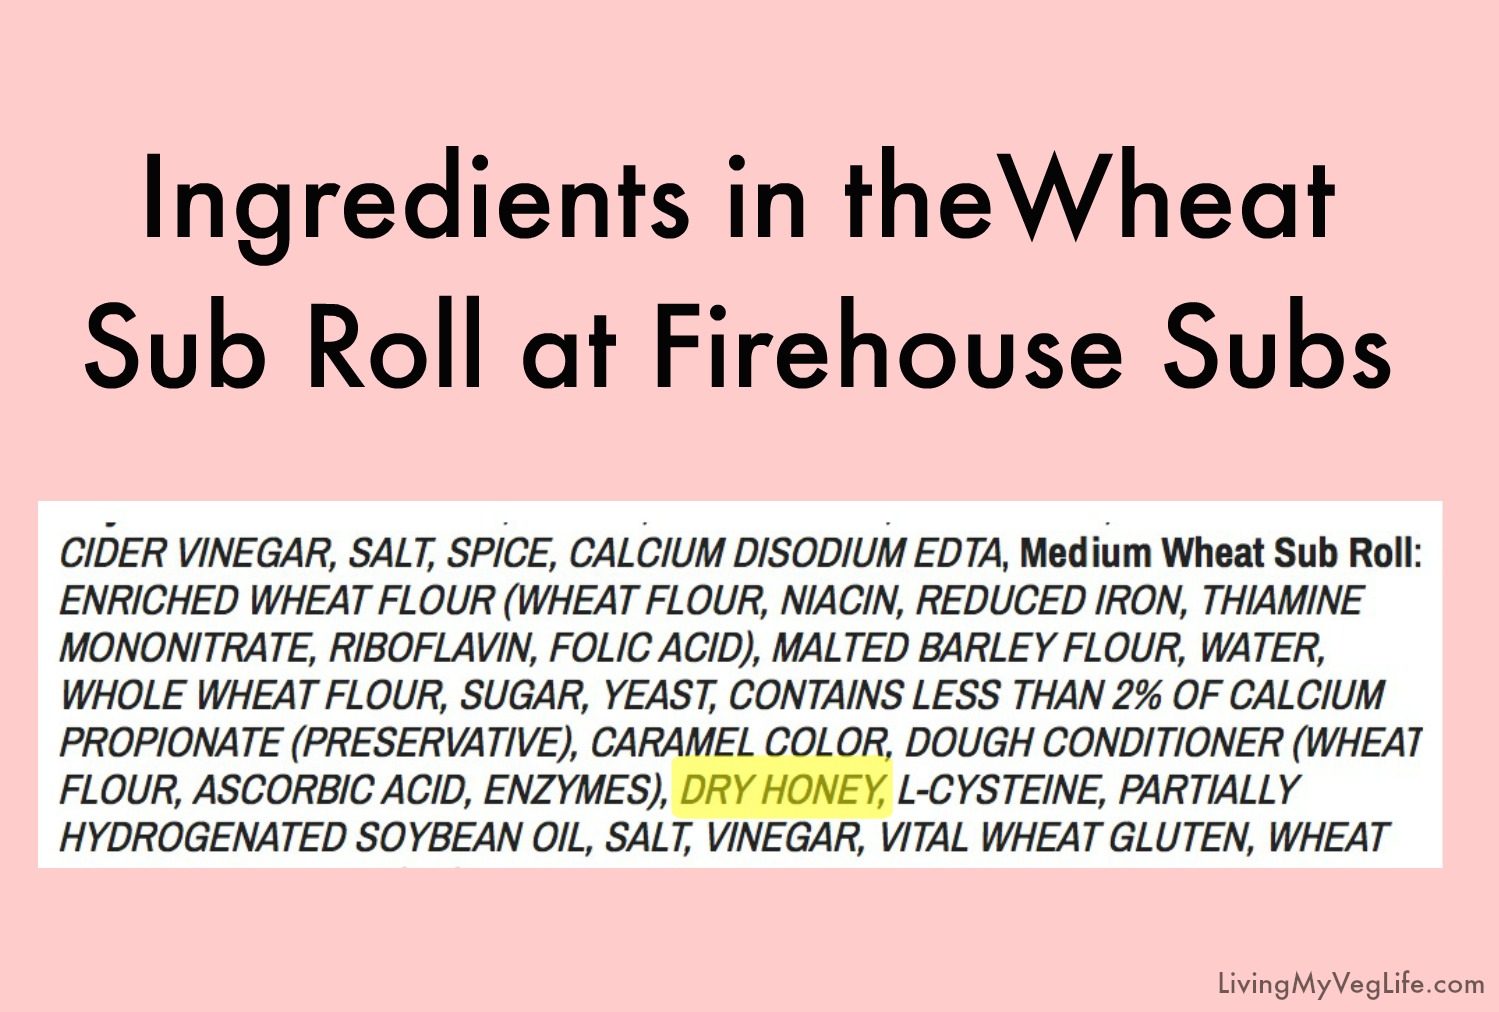 Ingredients in the what sub at firehouse subs